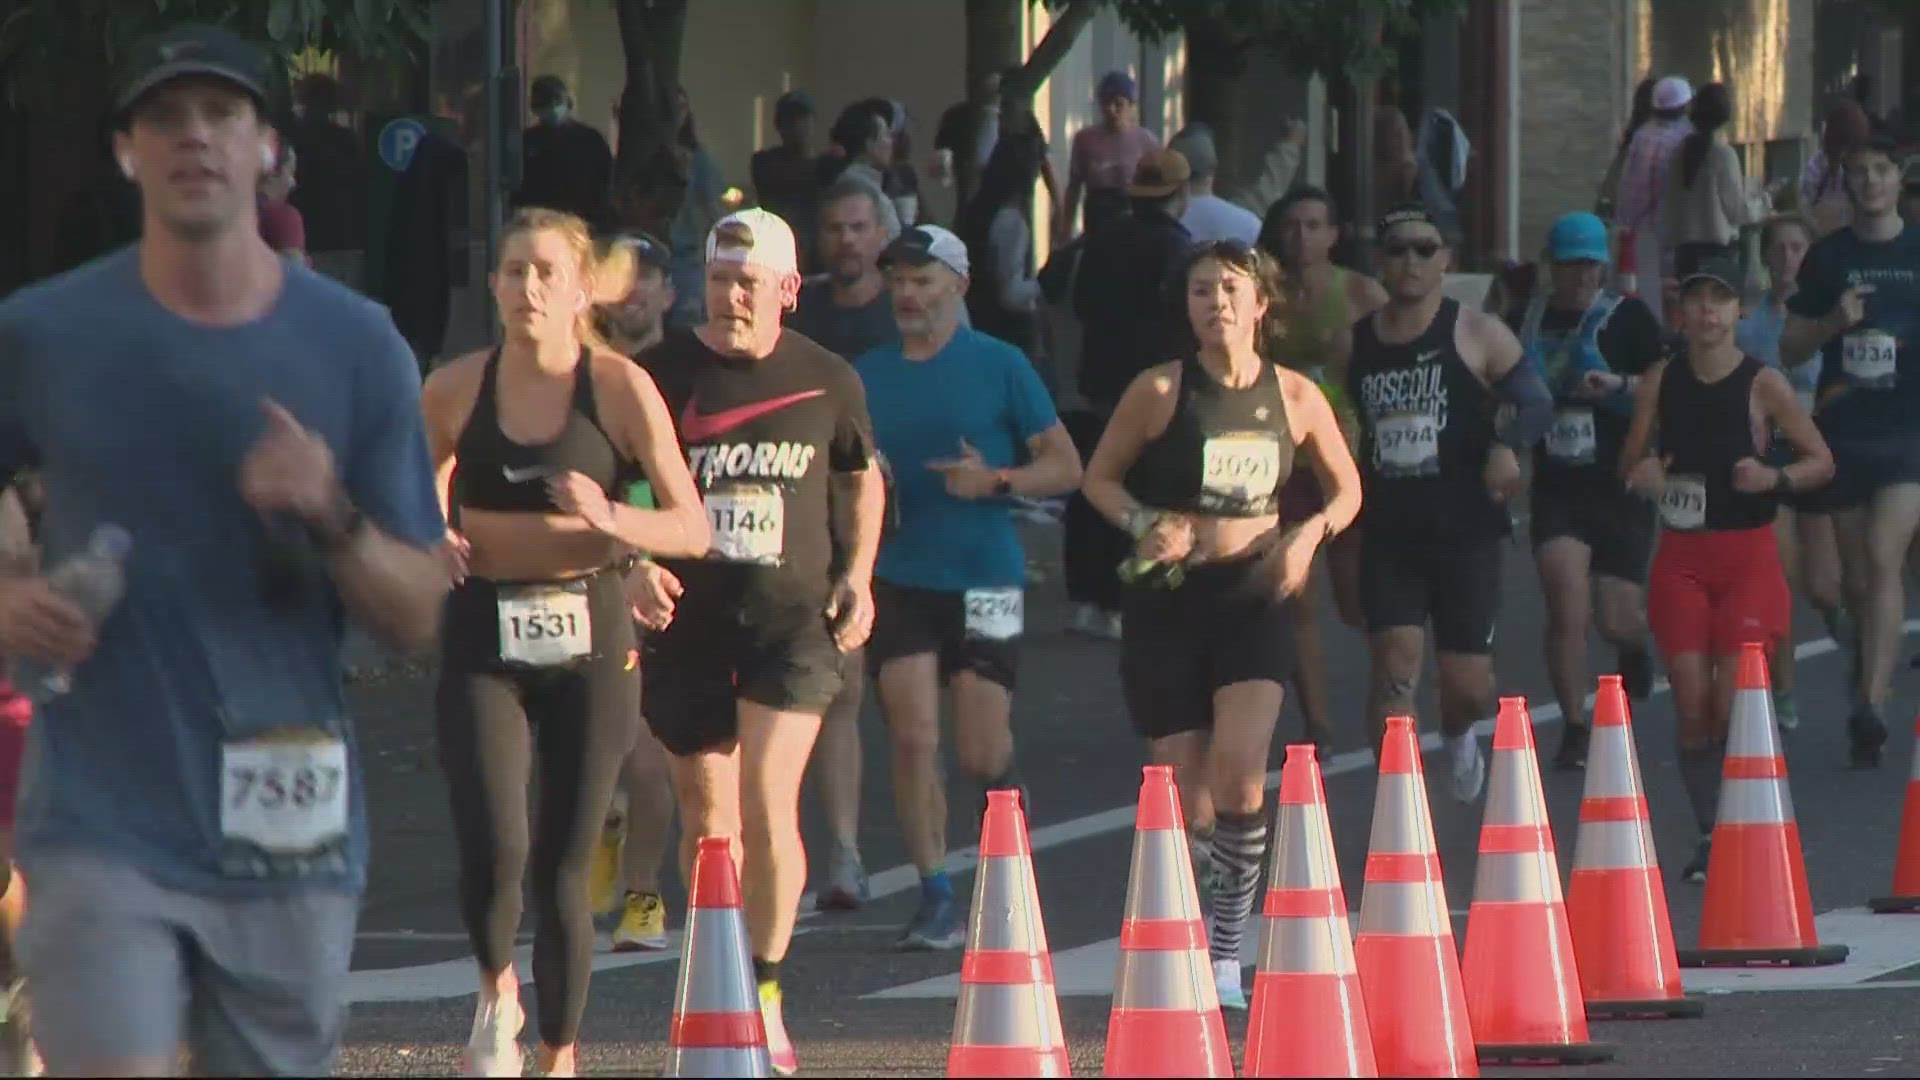 The 51st annual Portland Marathon will be held Oct. 1. Chris McGinness spoke with Red Lizard Running Club, which helps runners cross the finish line.